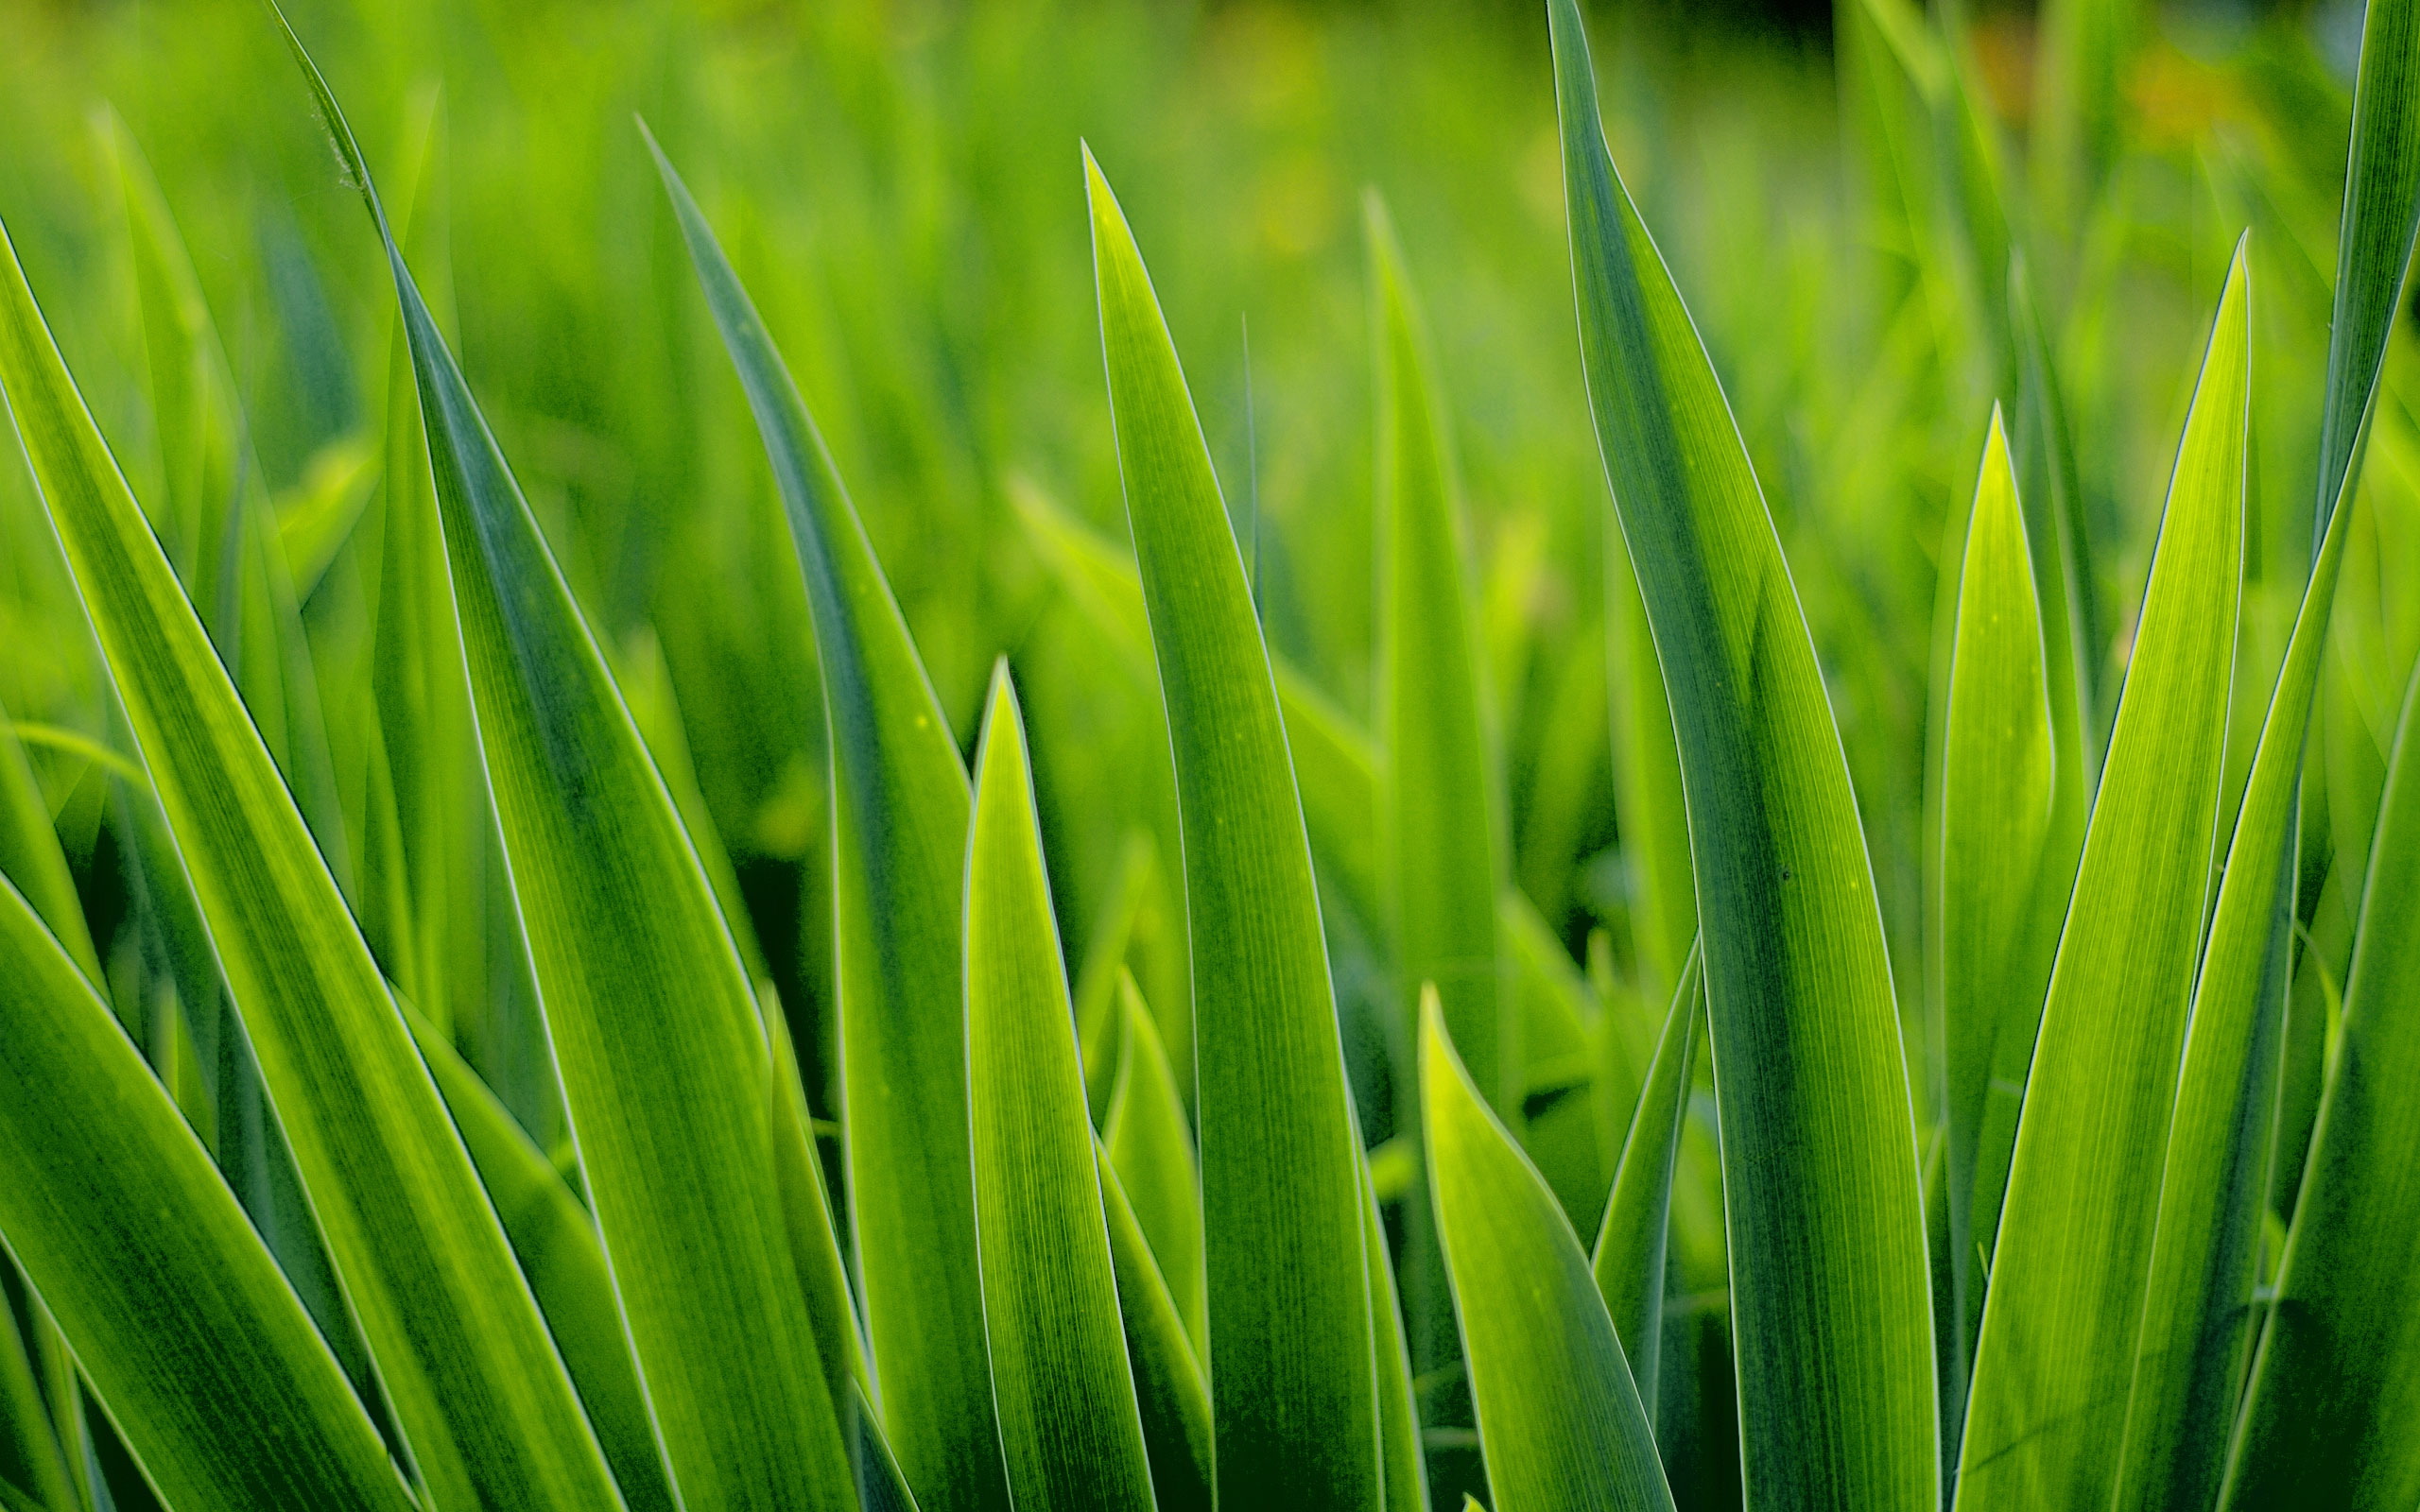  grass  Wallpapers  HD Desktop and Mobile Backgrounds